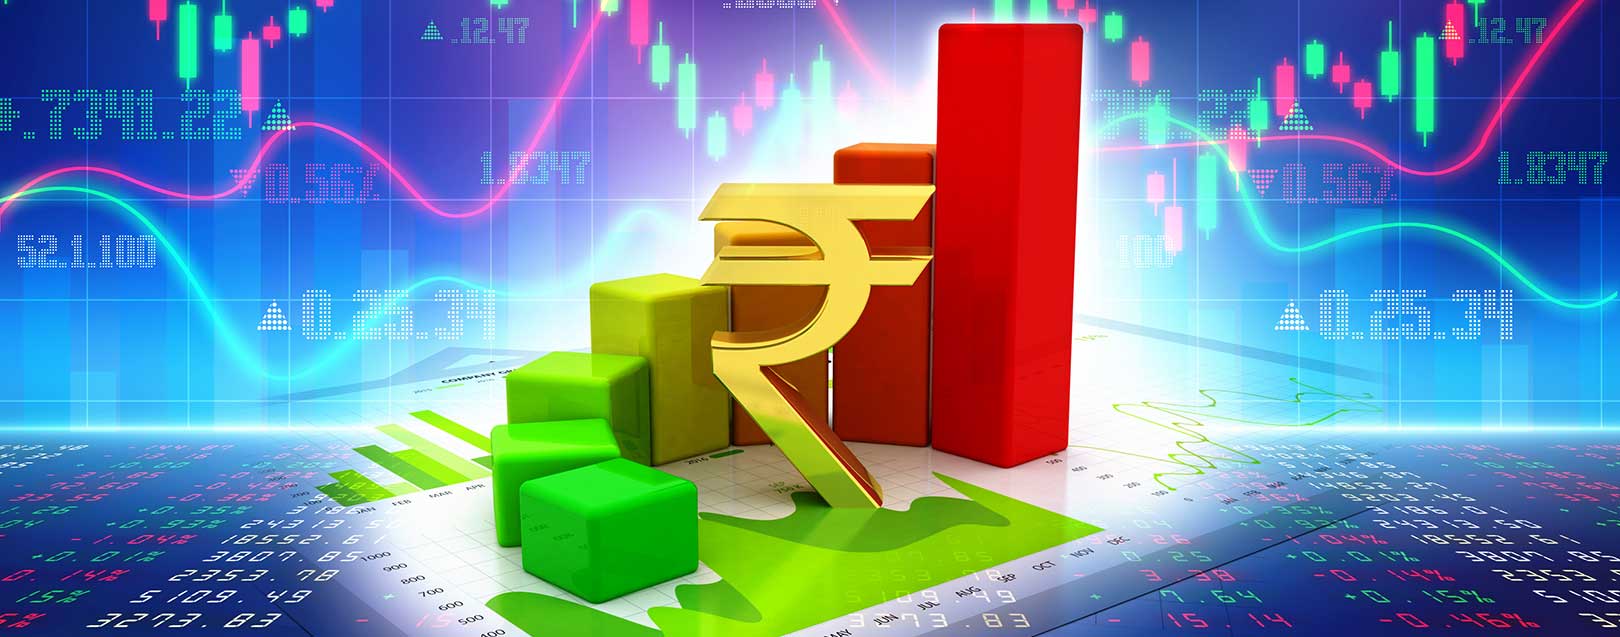 India’s economy is recovering; to grow at 7.3% in 2018-19: Fitch